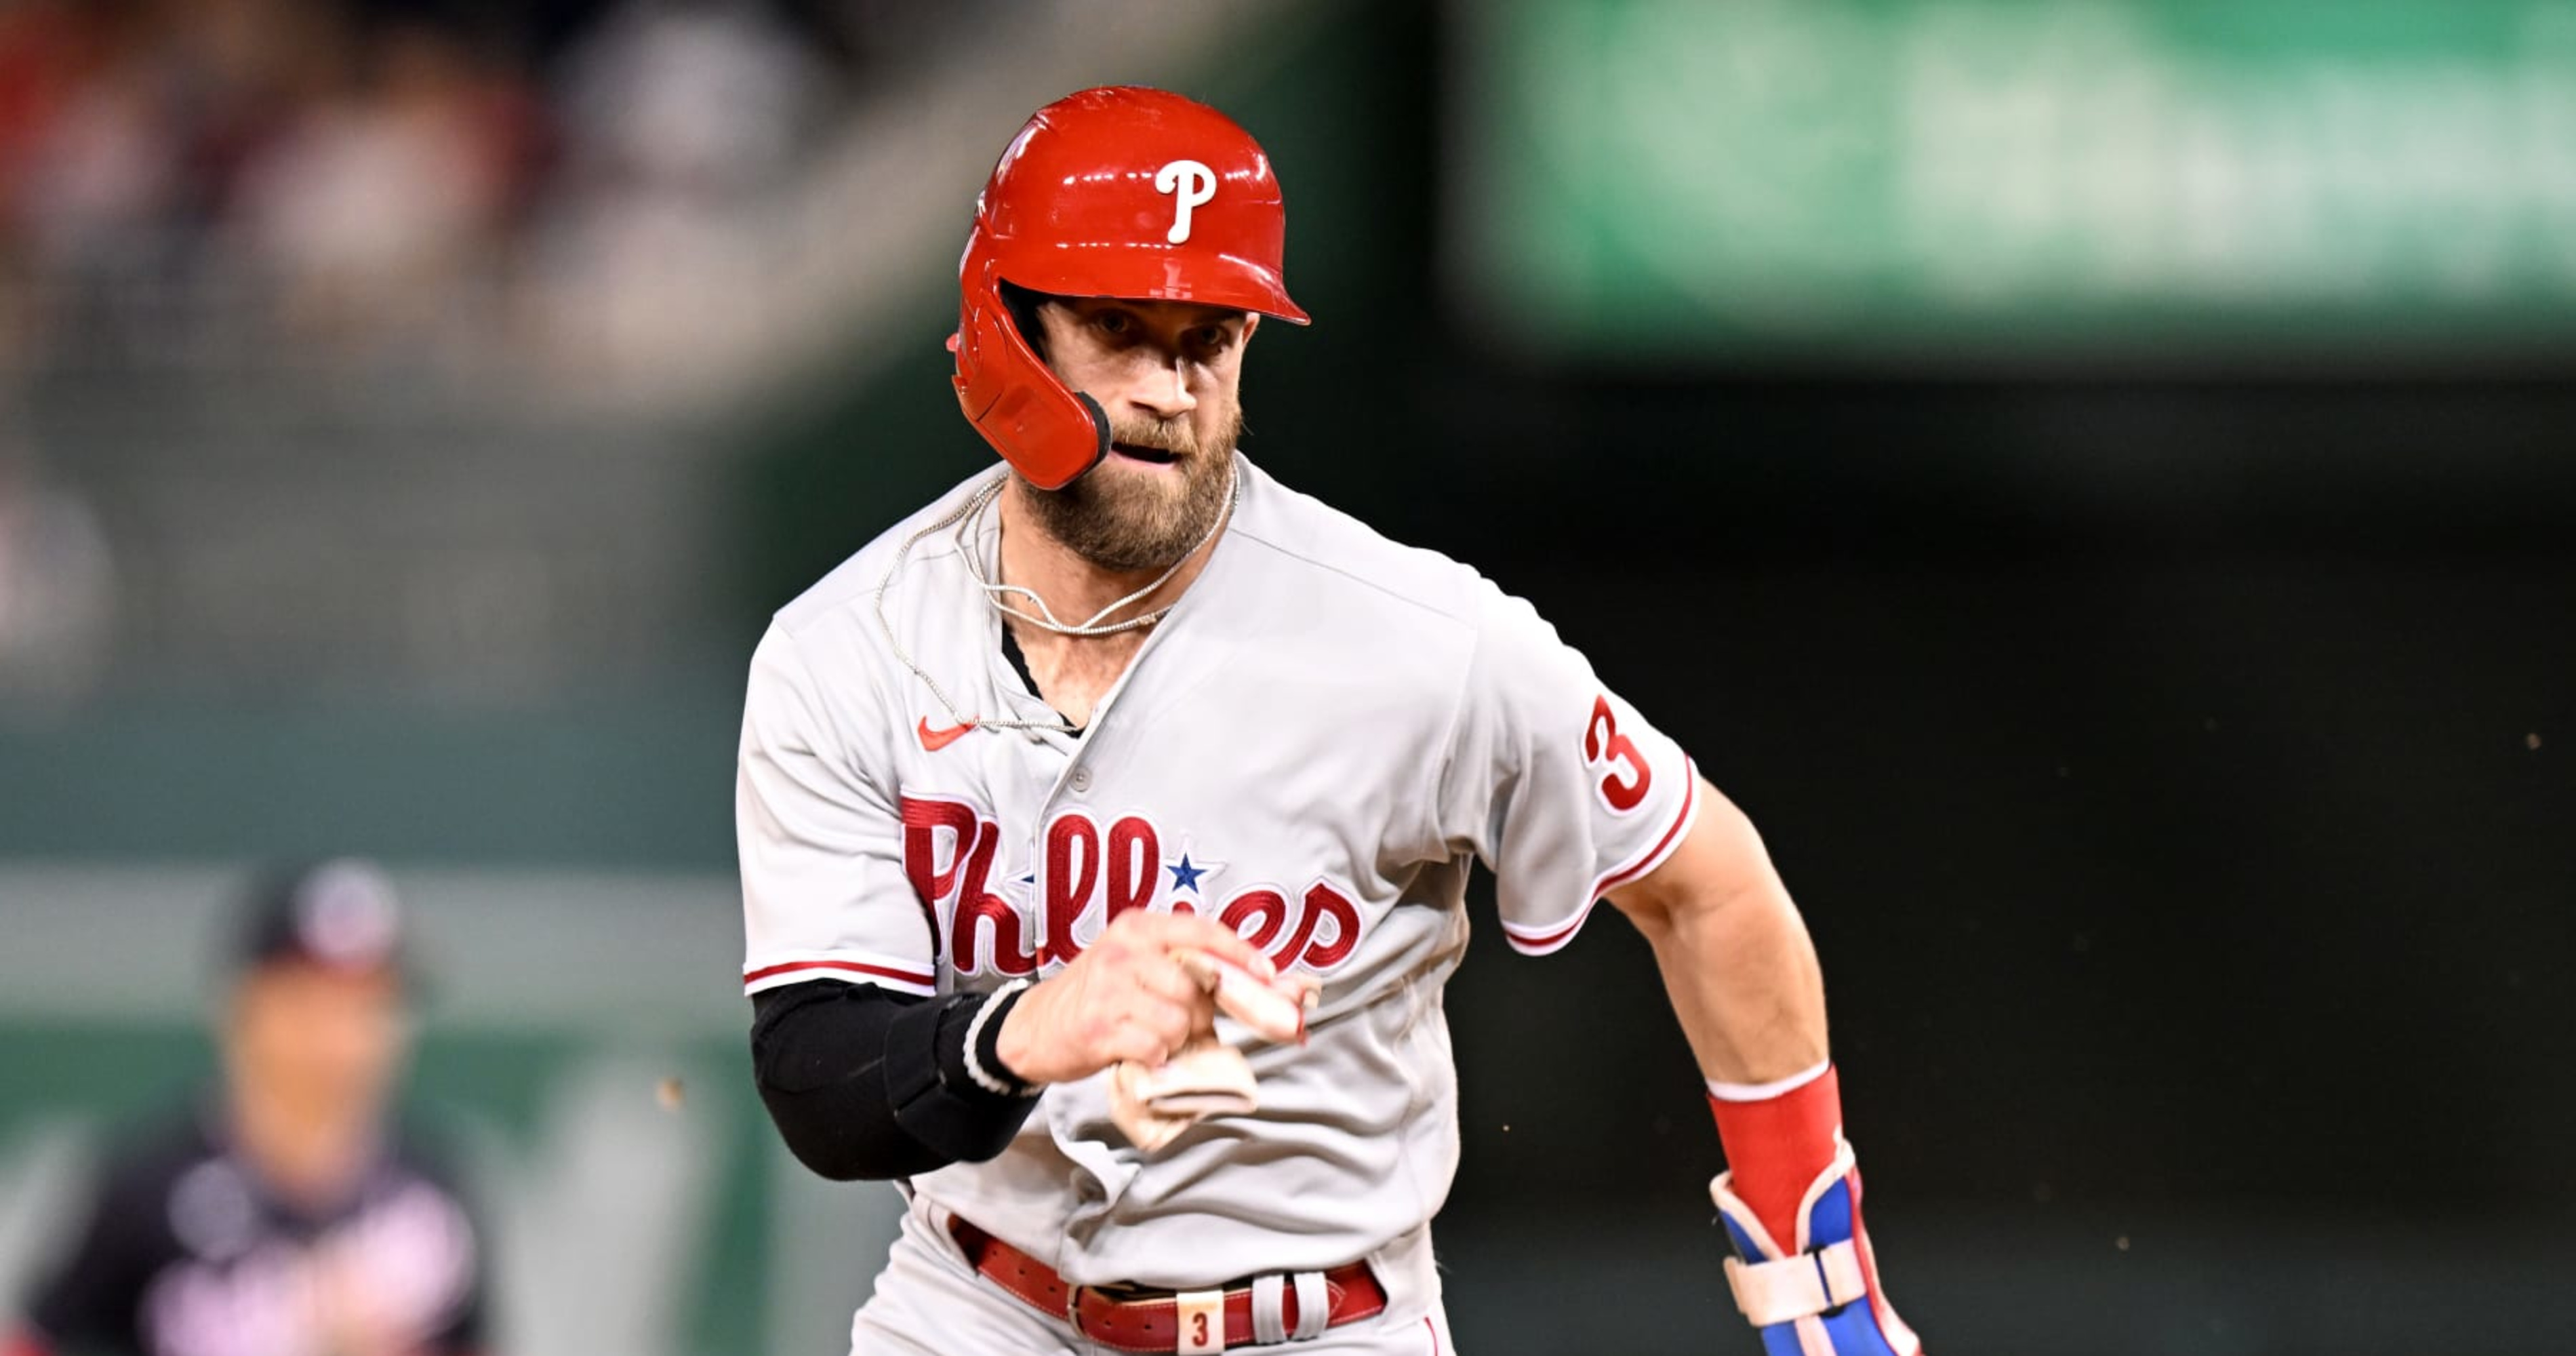 Phillies’ Bryce Harper Resumes Throwing, Hopes to Play RF This Season After Injury